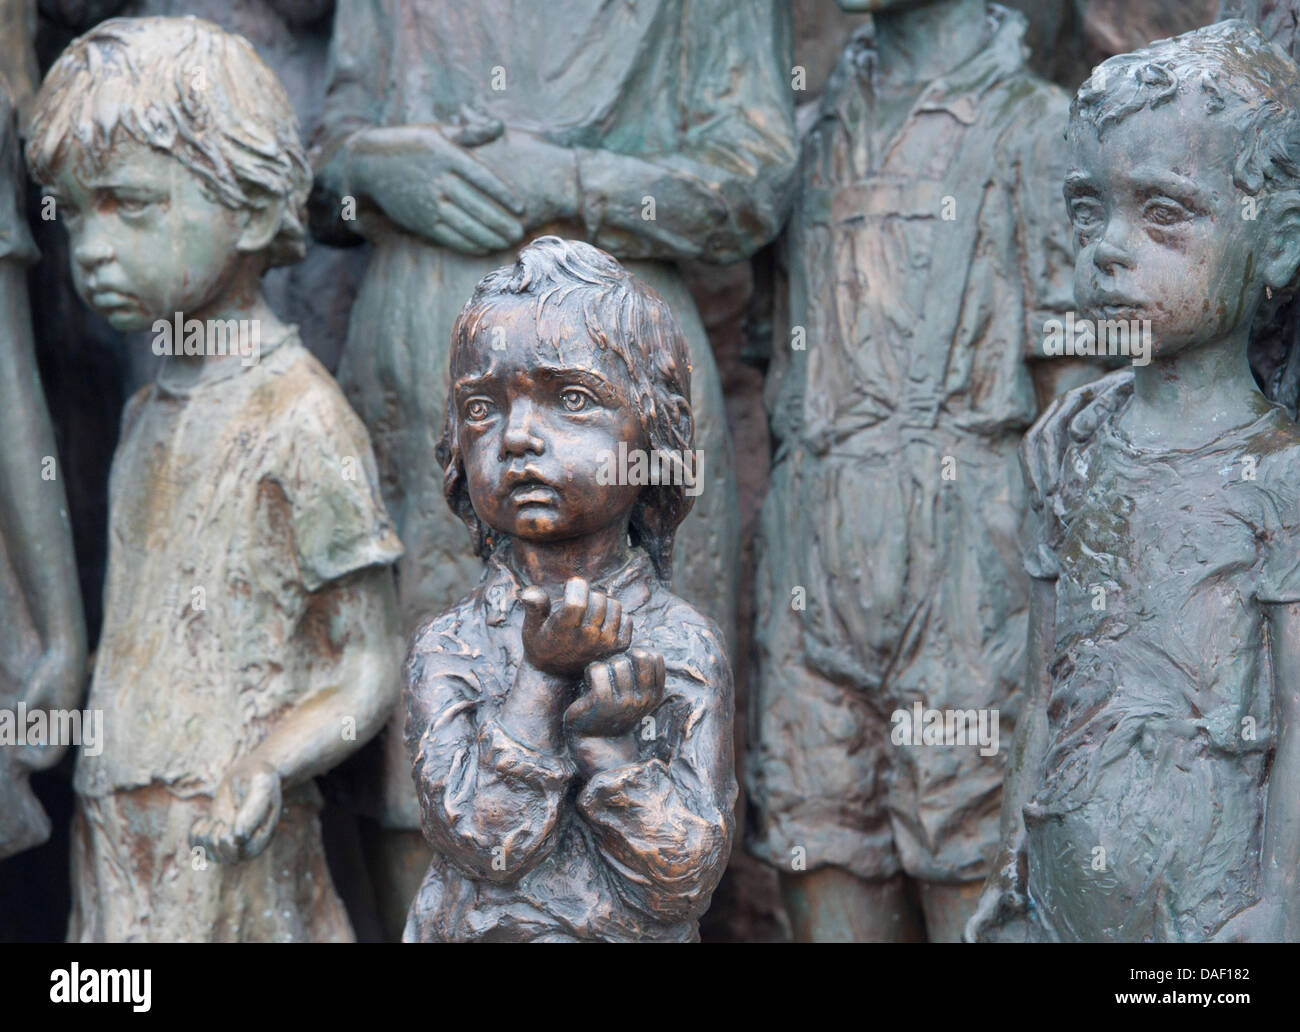 The monument for the murdered children in Lidice Memorial is seen in Lidice, Czech Republic, 24 November 2011. On 10 June 1942, the village was completely destroyed in reprisal for the assassination of Reinhard Heydrich, chief of the Reich Main Security Office. 340 residents died in the reprisal action. Seehofer is visiting the Czech capital Prague and three memorials to the victim Stock Photo